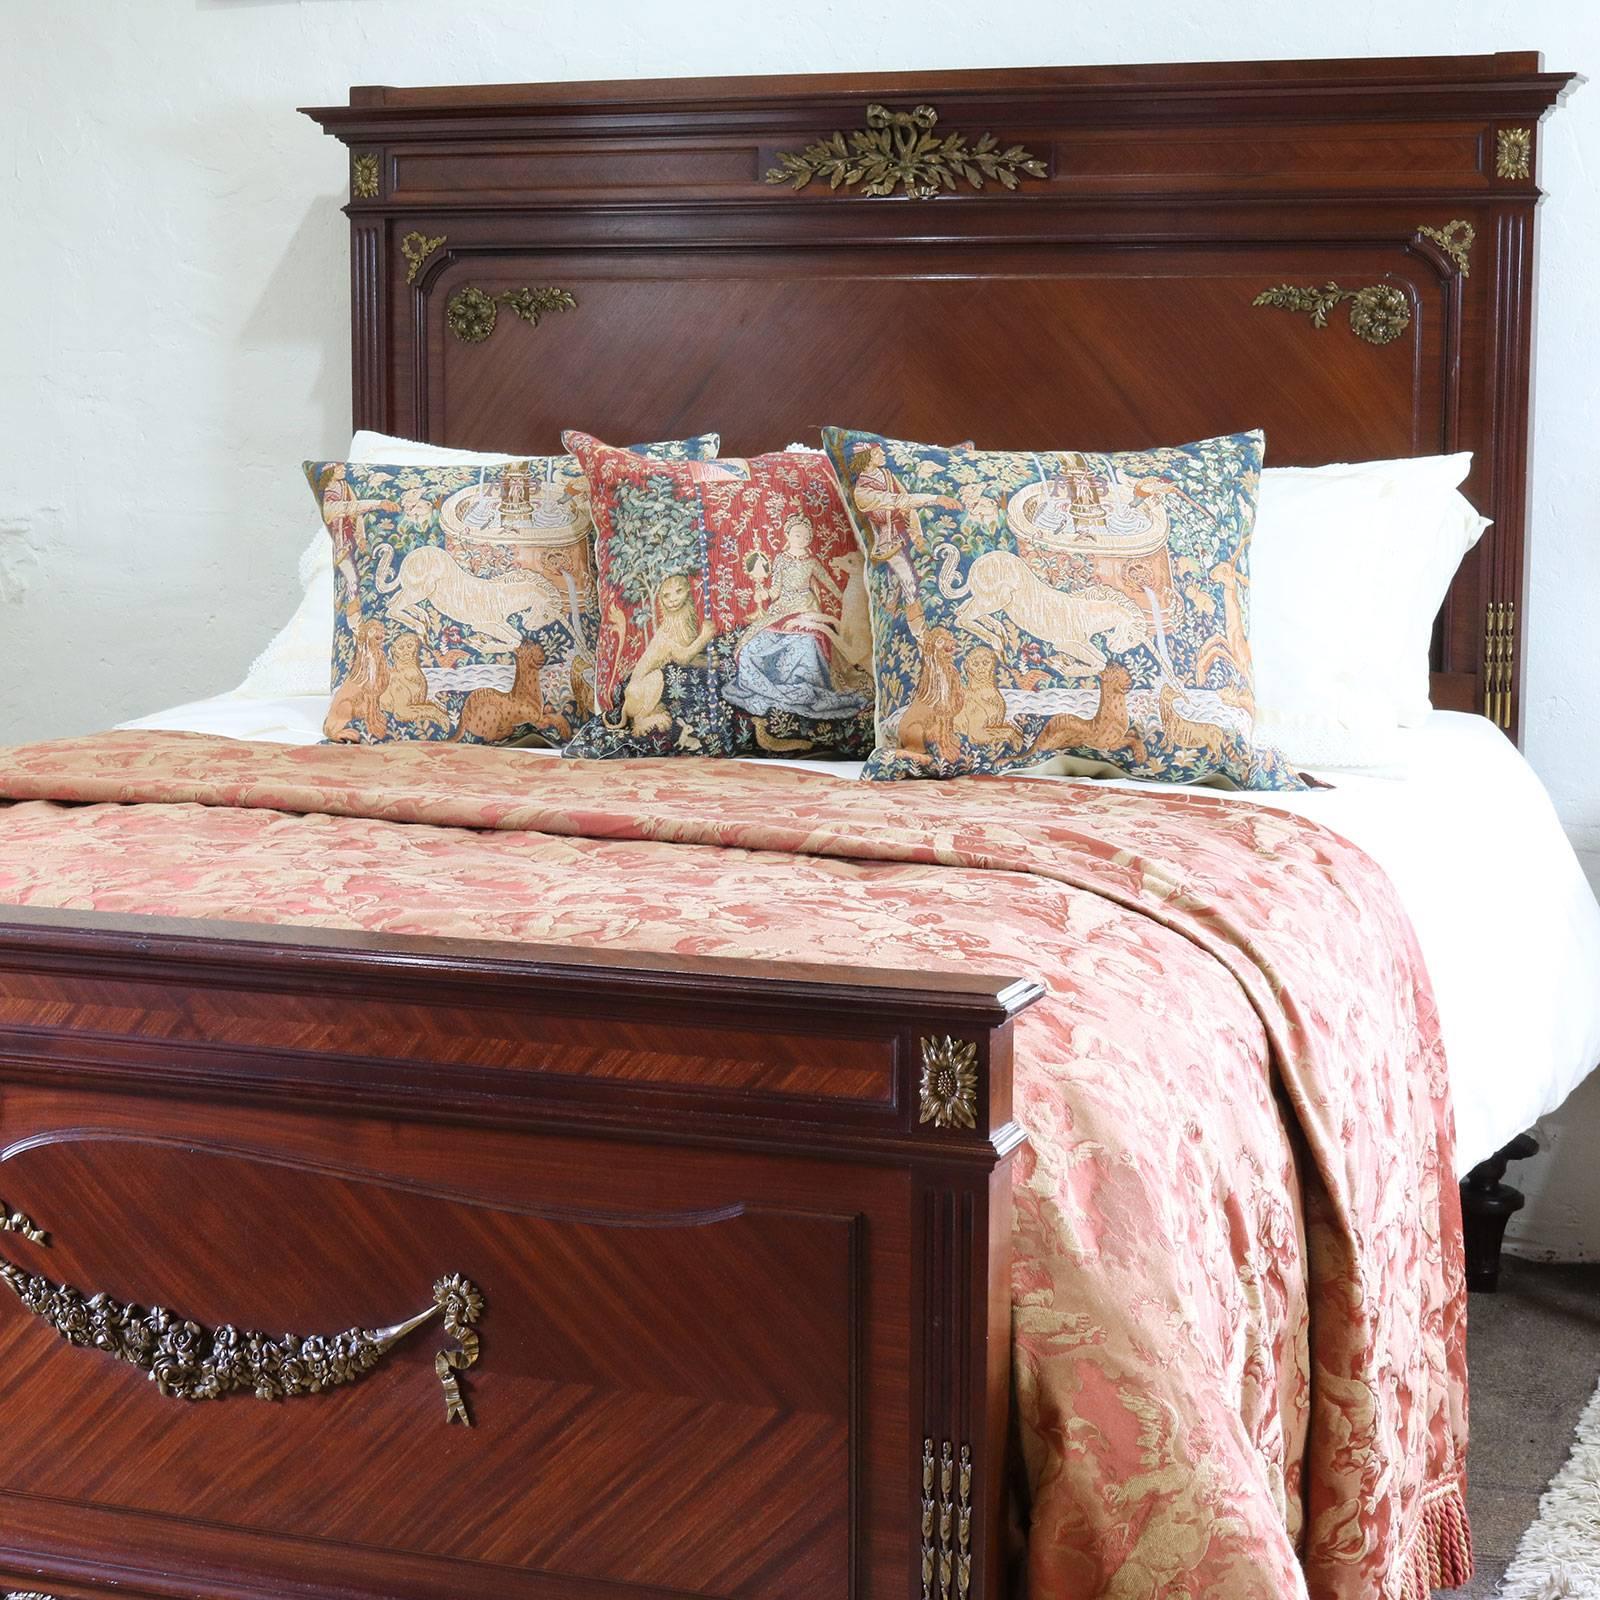 A wide French bedstead in the Empire Revival style with quartered veneer panels and ormolu decoration.

This bed accepts a British kingsize or American Queen Size (60 inches wide) base and mattress set, although it will accept a wider 63 inch or